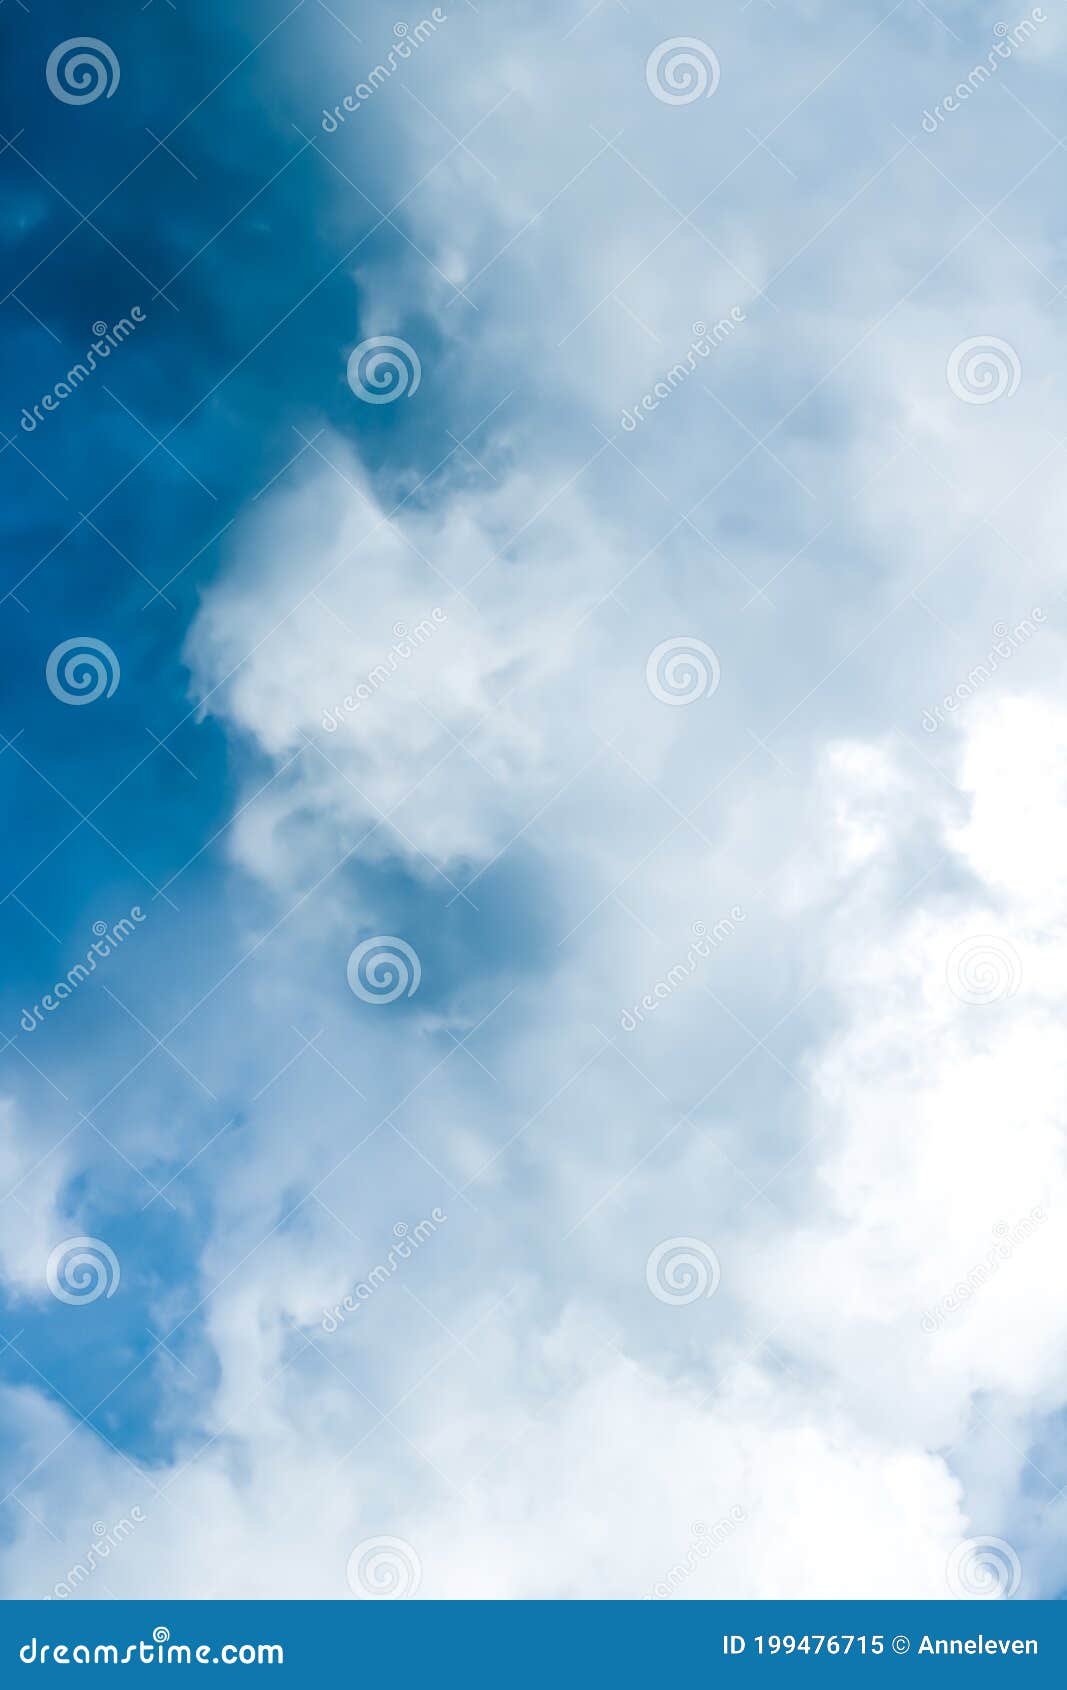 Dreamy Blue Sky and Clouds, Spiritual and Nature Background Stock Image ...